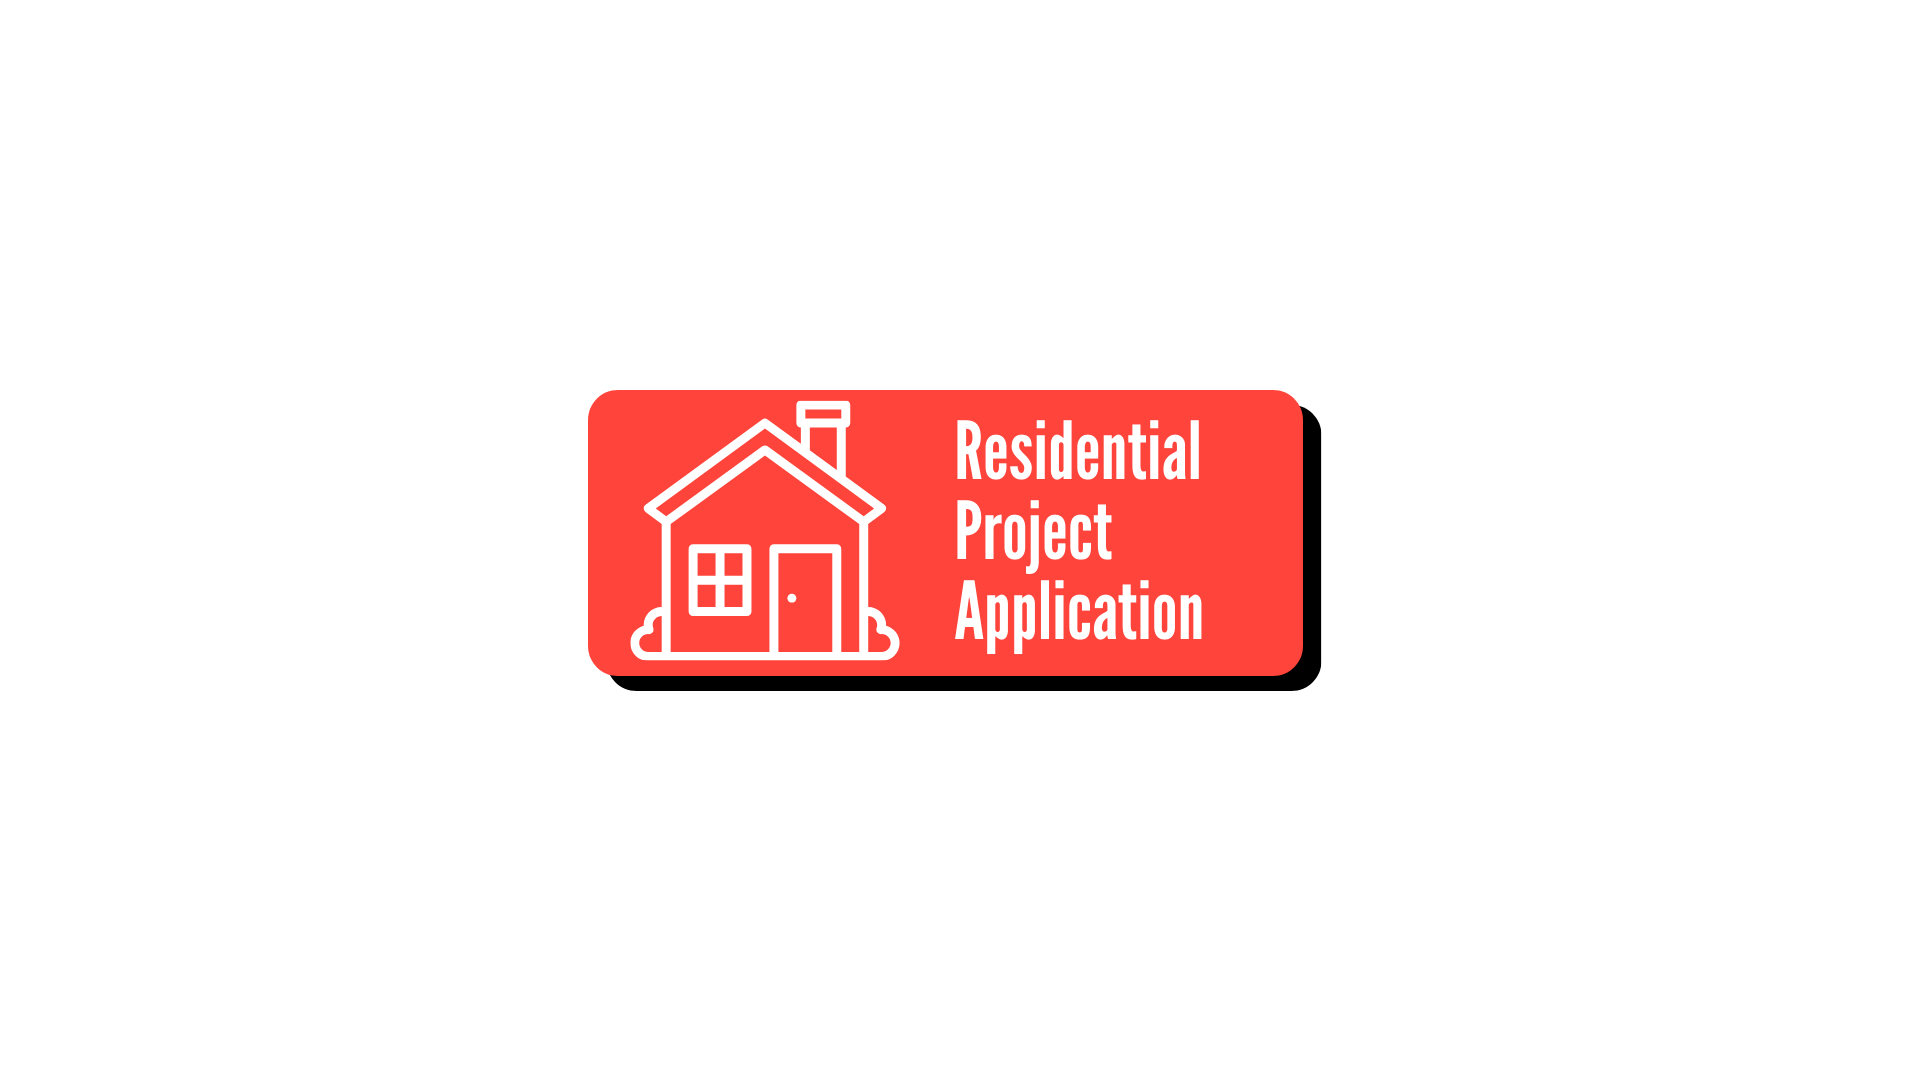 Residential application button